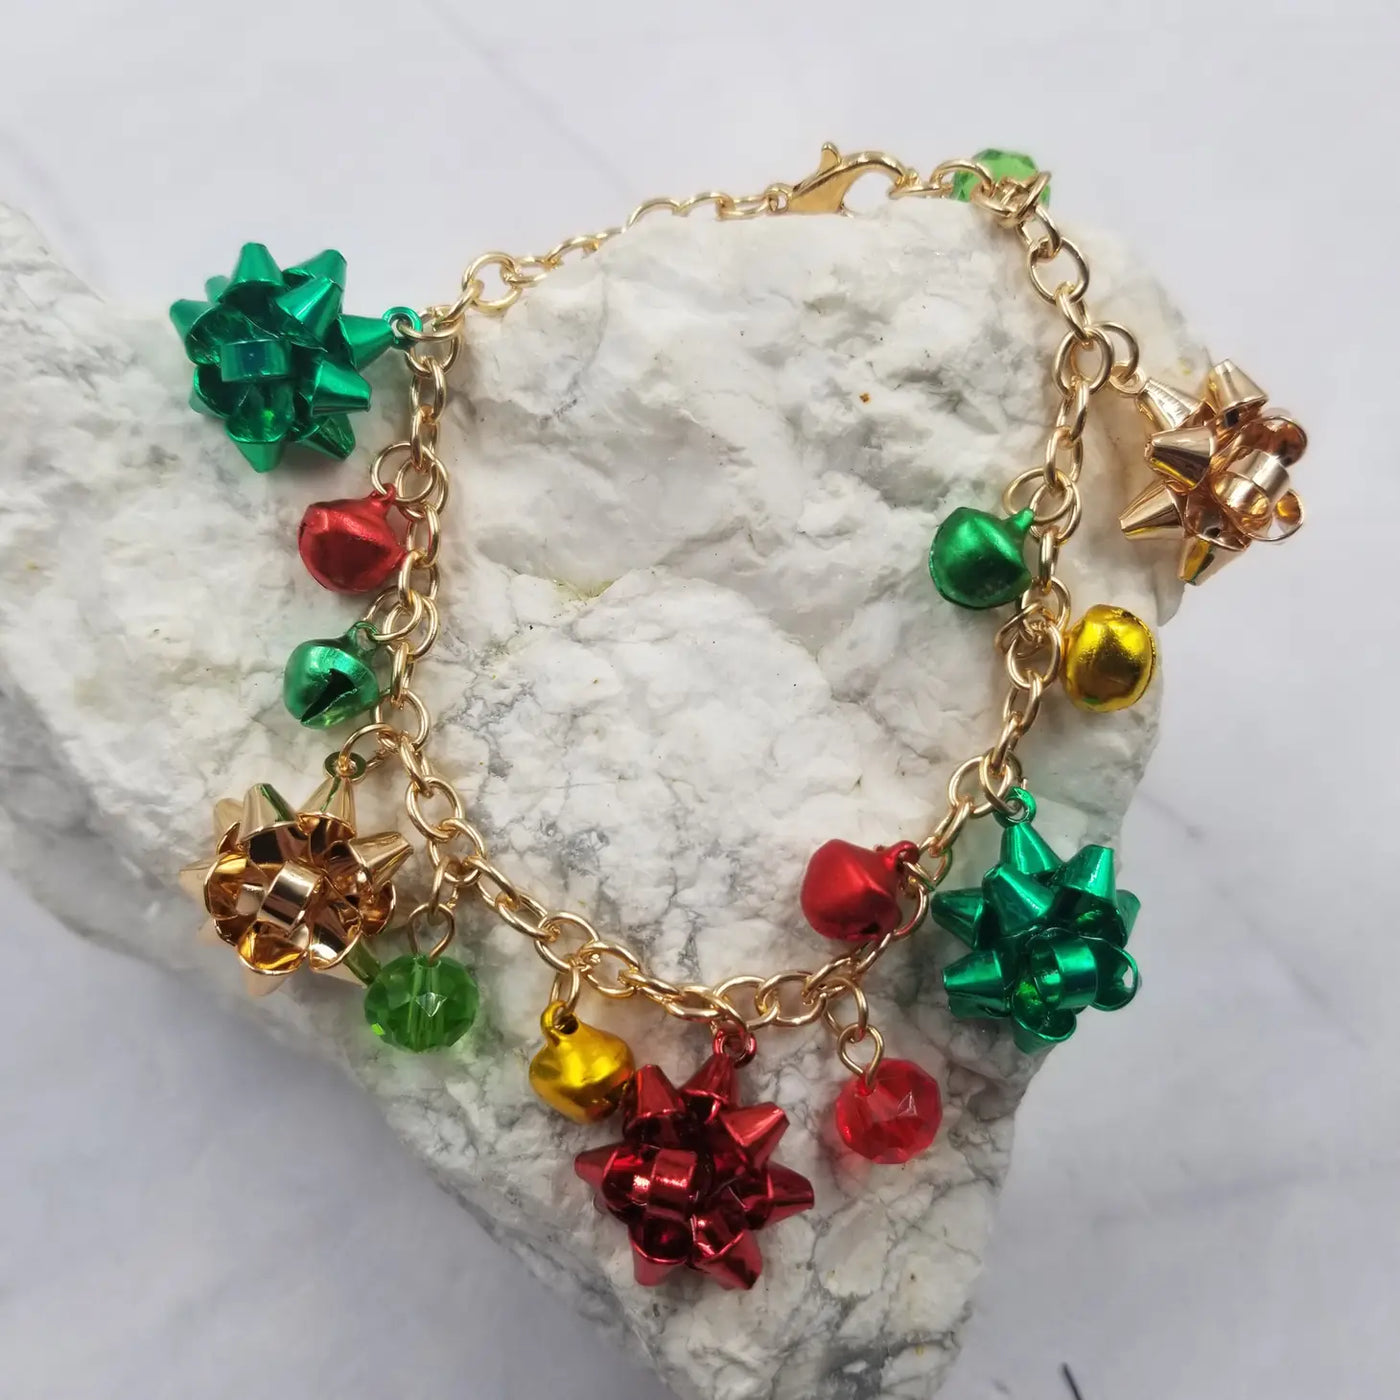 Christmas Bows, Beads, and Bells Chain Bracelet